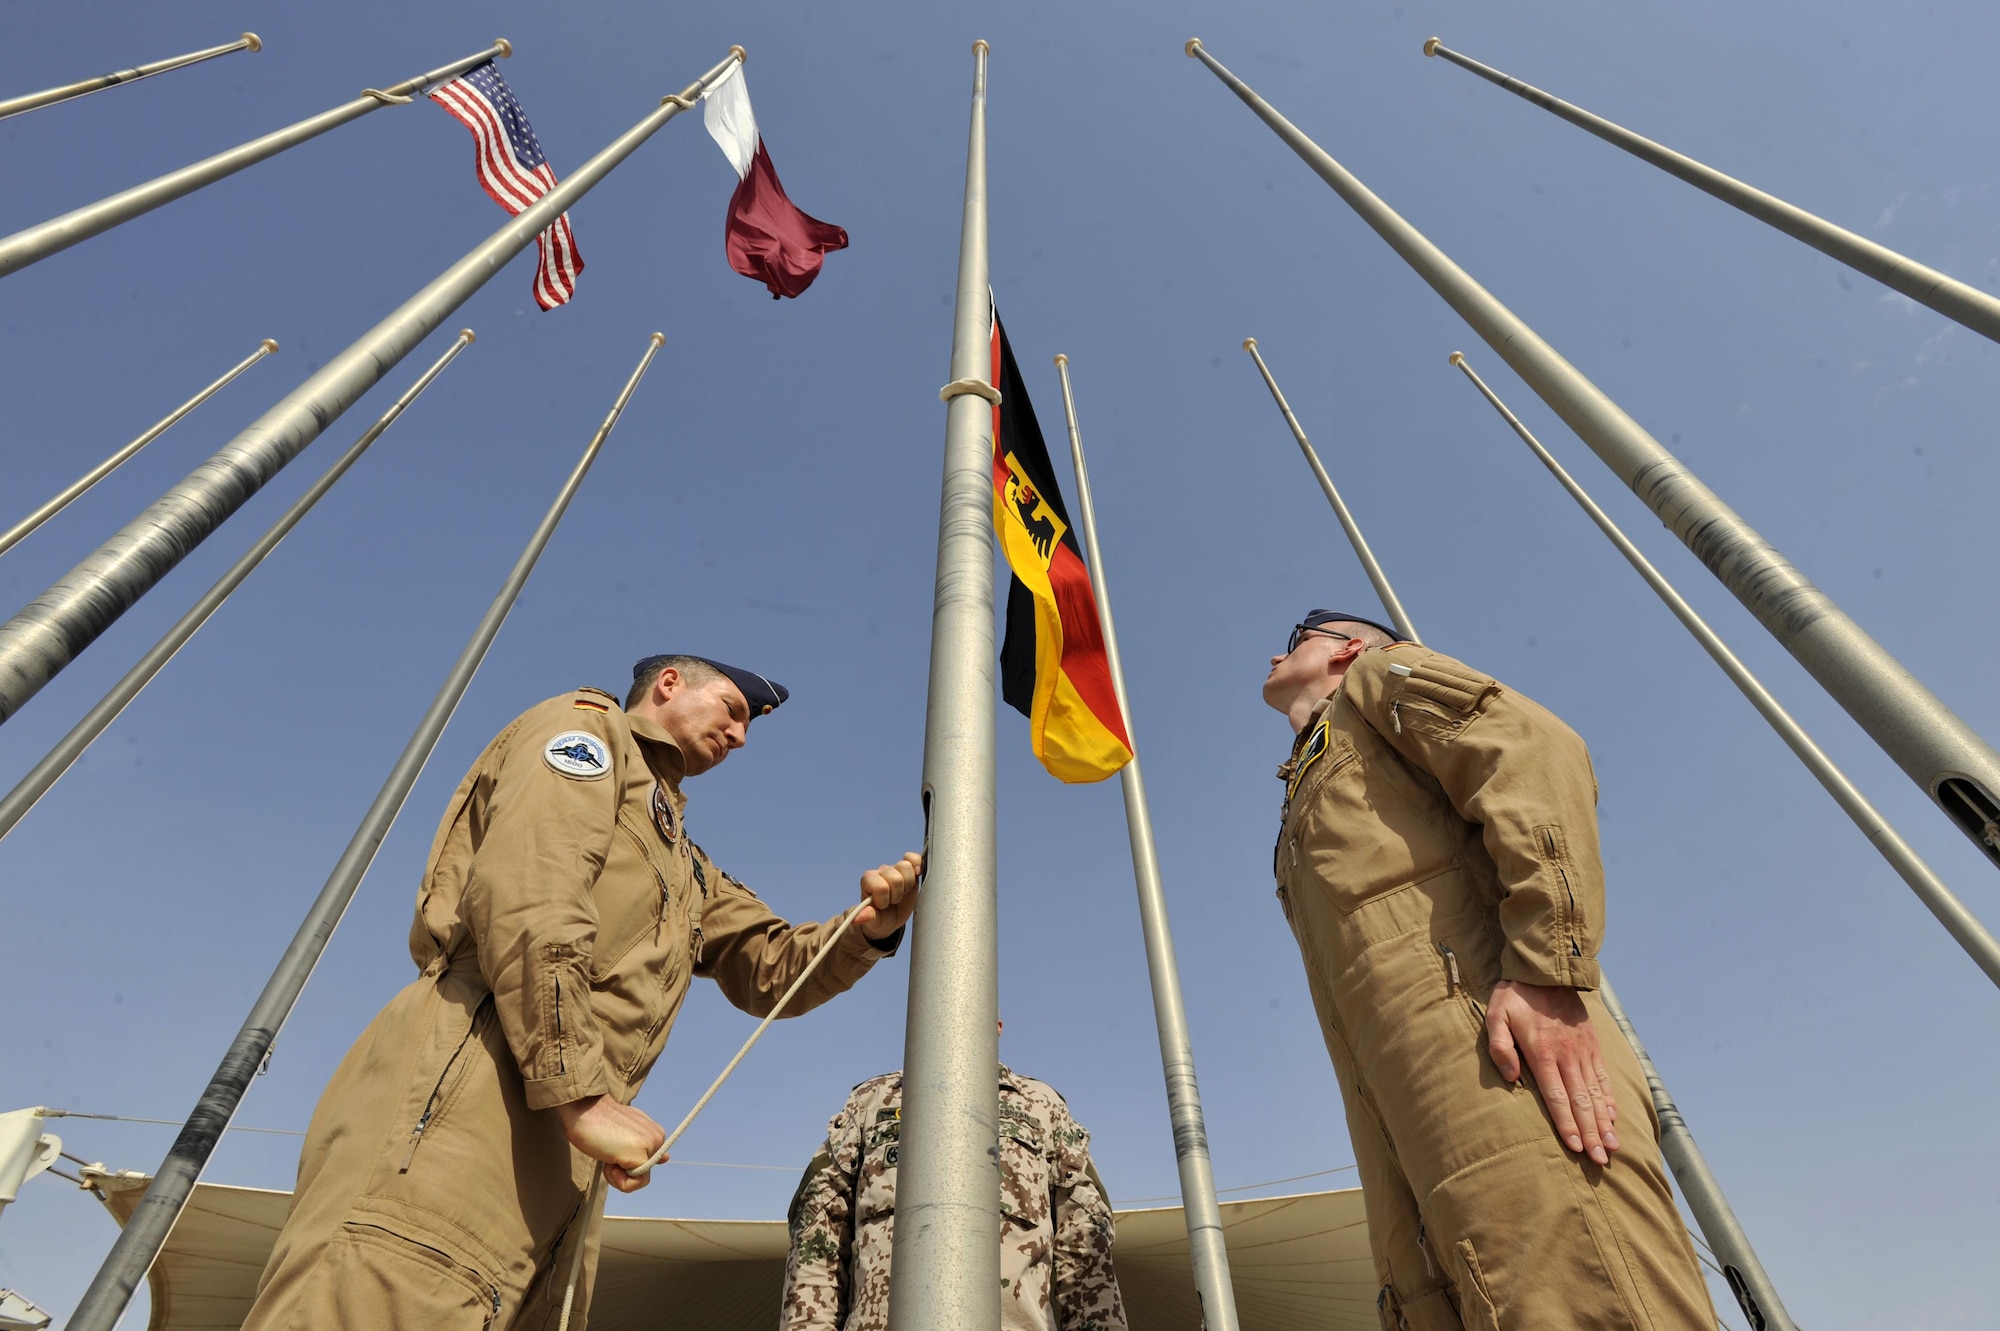 German Air Force members raise the German flag during a ceremony at Al Udeid Air Base, Qatar, Feb. 8, 2016. The ceremony recognized the addition Germany to the coalition supporting Operation Inherent Resolve. (U.S. Air Force photo by Master Sgt. Joshua Strang)